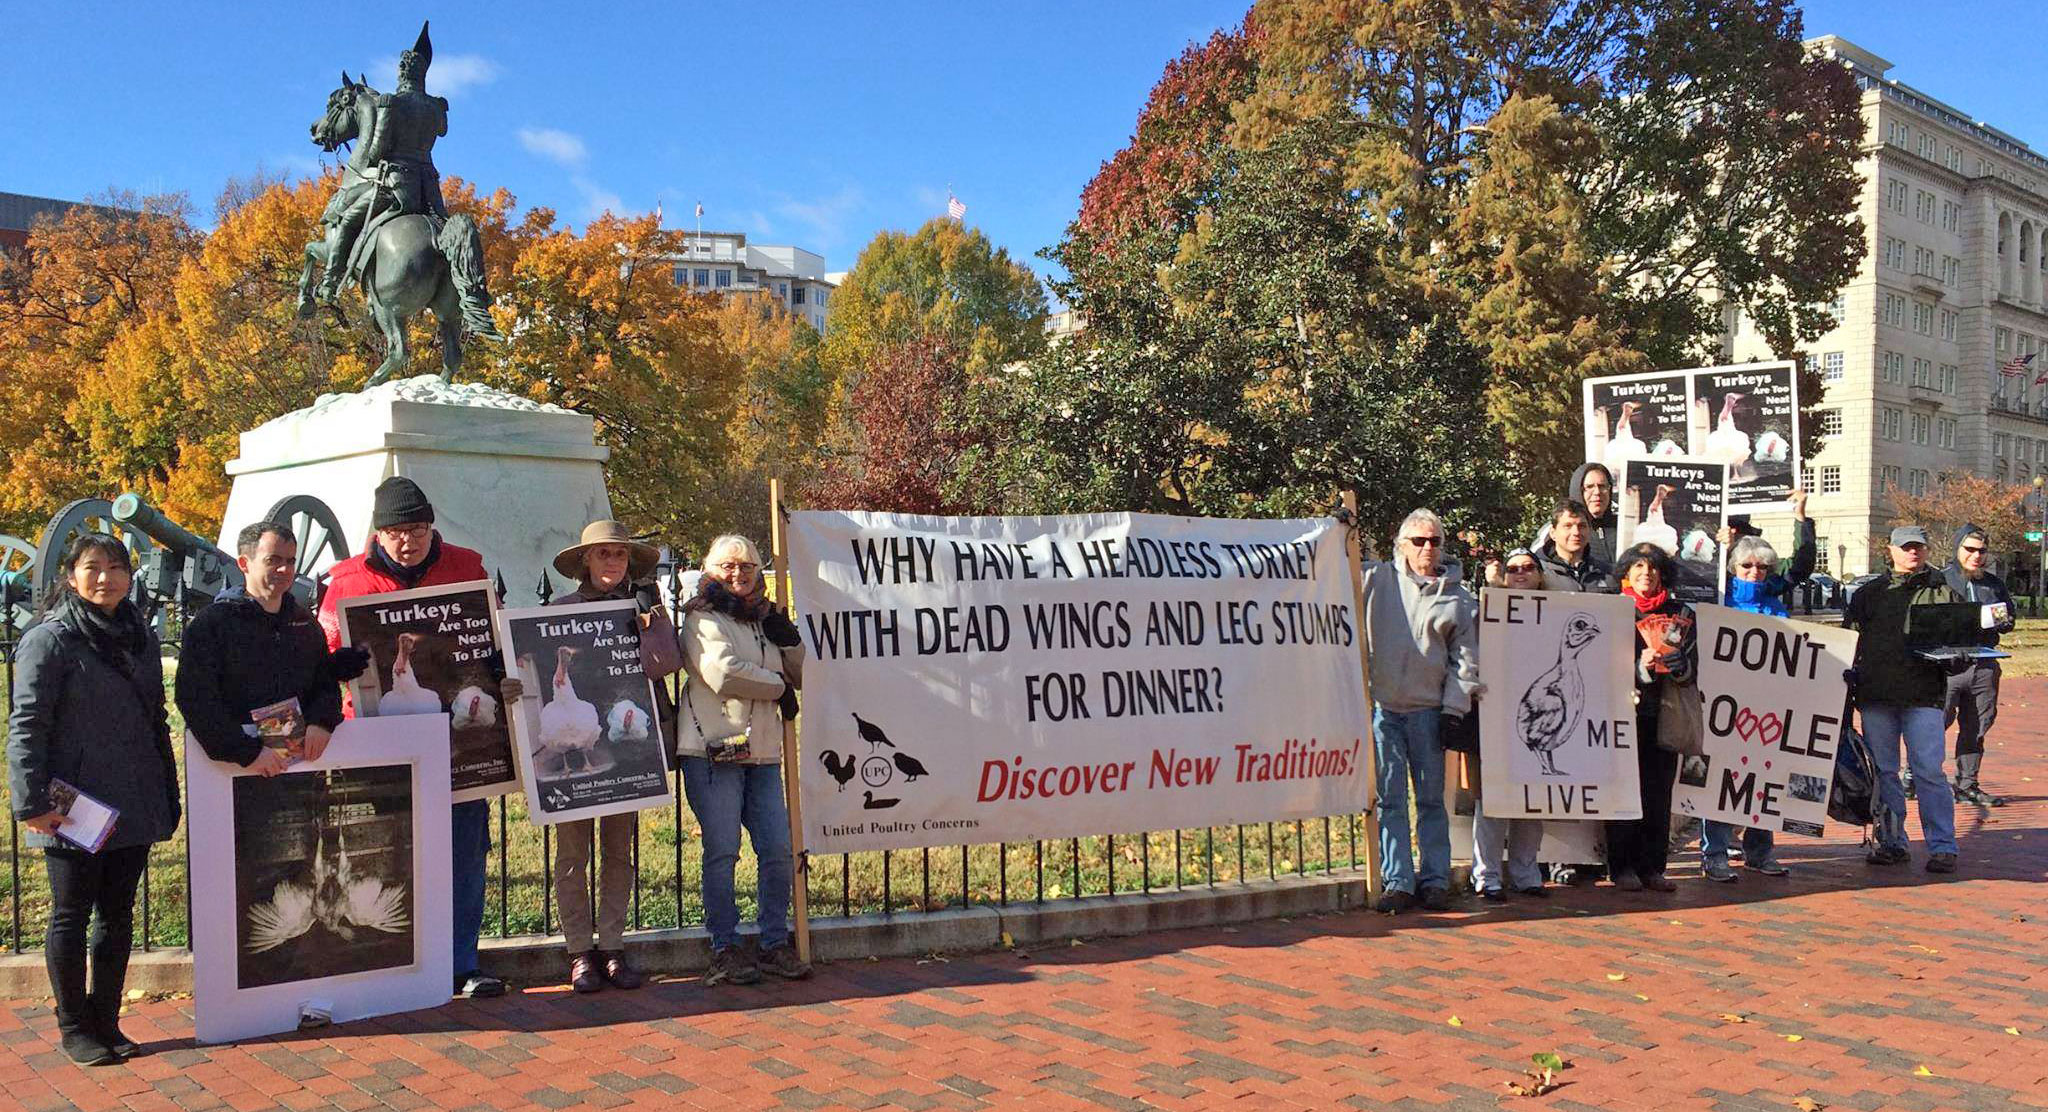 Activists with signs near the White House